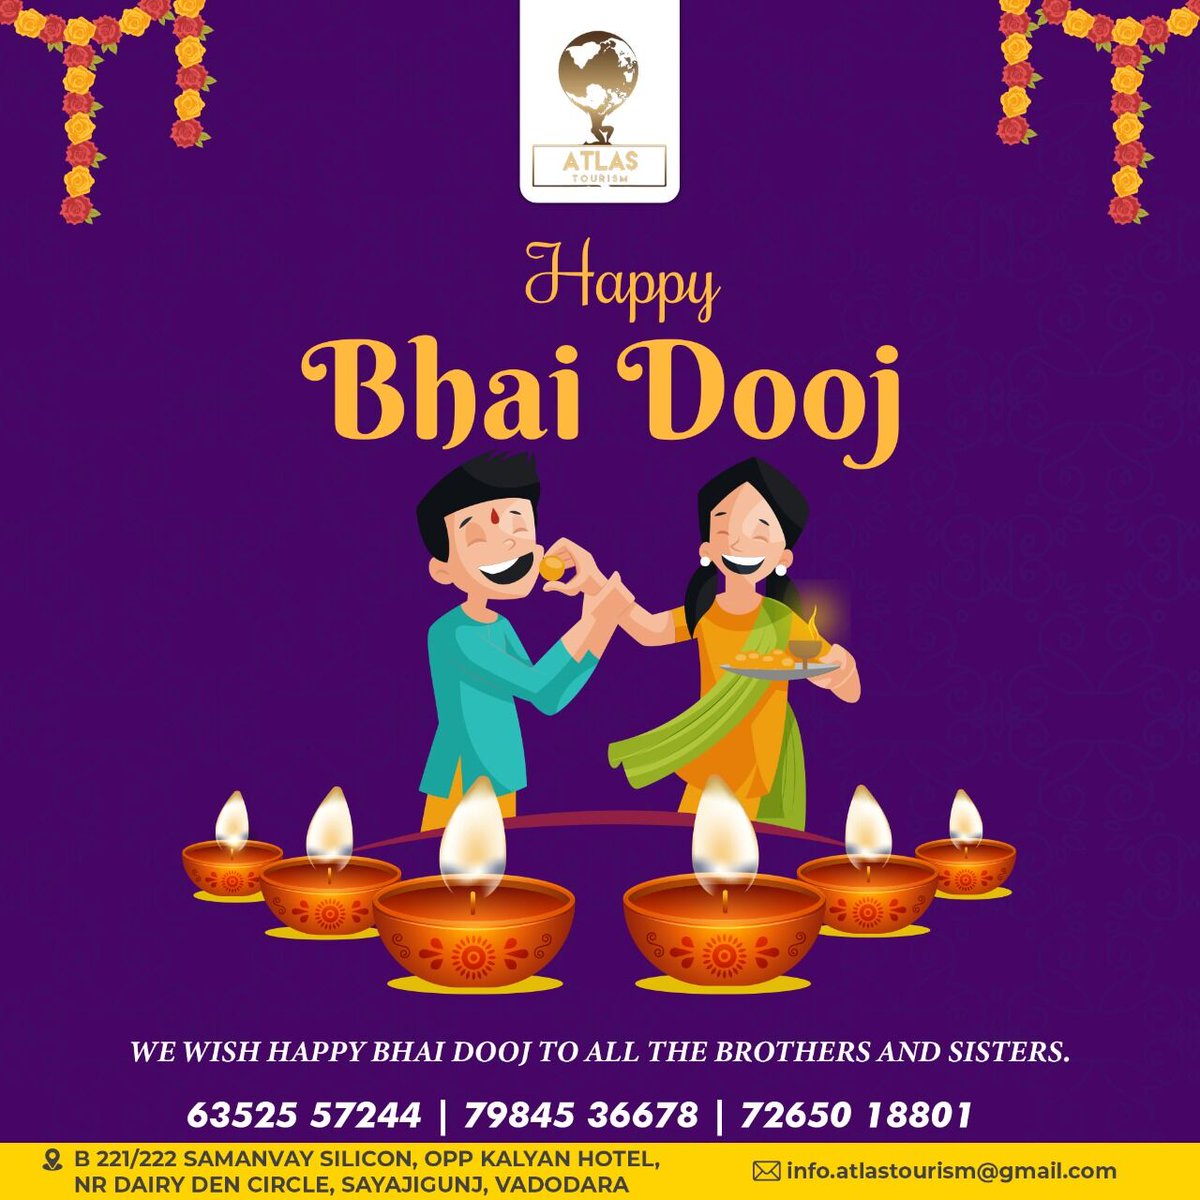 Surprise your sisters with tickets to somewhere on the auspicious occasion of Bhai Dooj.

#atlastourism #tourism #auspiciousday #holyfestival #brothersister #bhaibehen #blessingsfromsister #sacredbond  #bhaiyadooj💞  #siblings #brothersisterlove